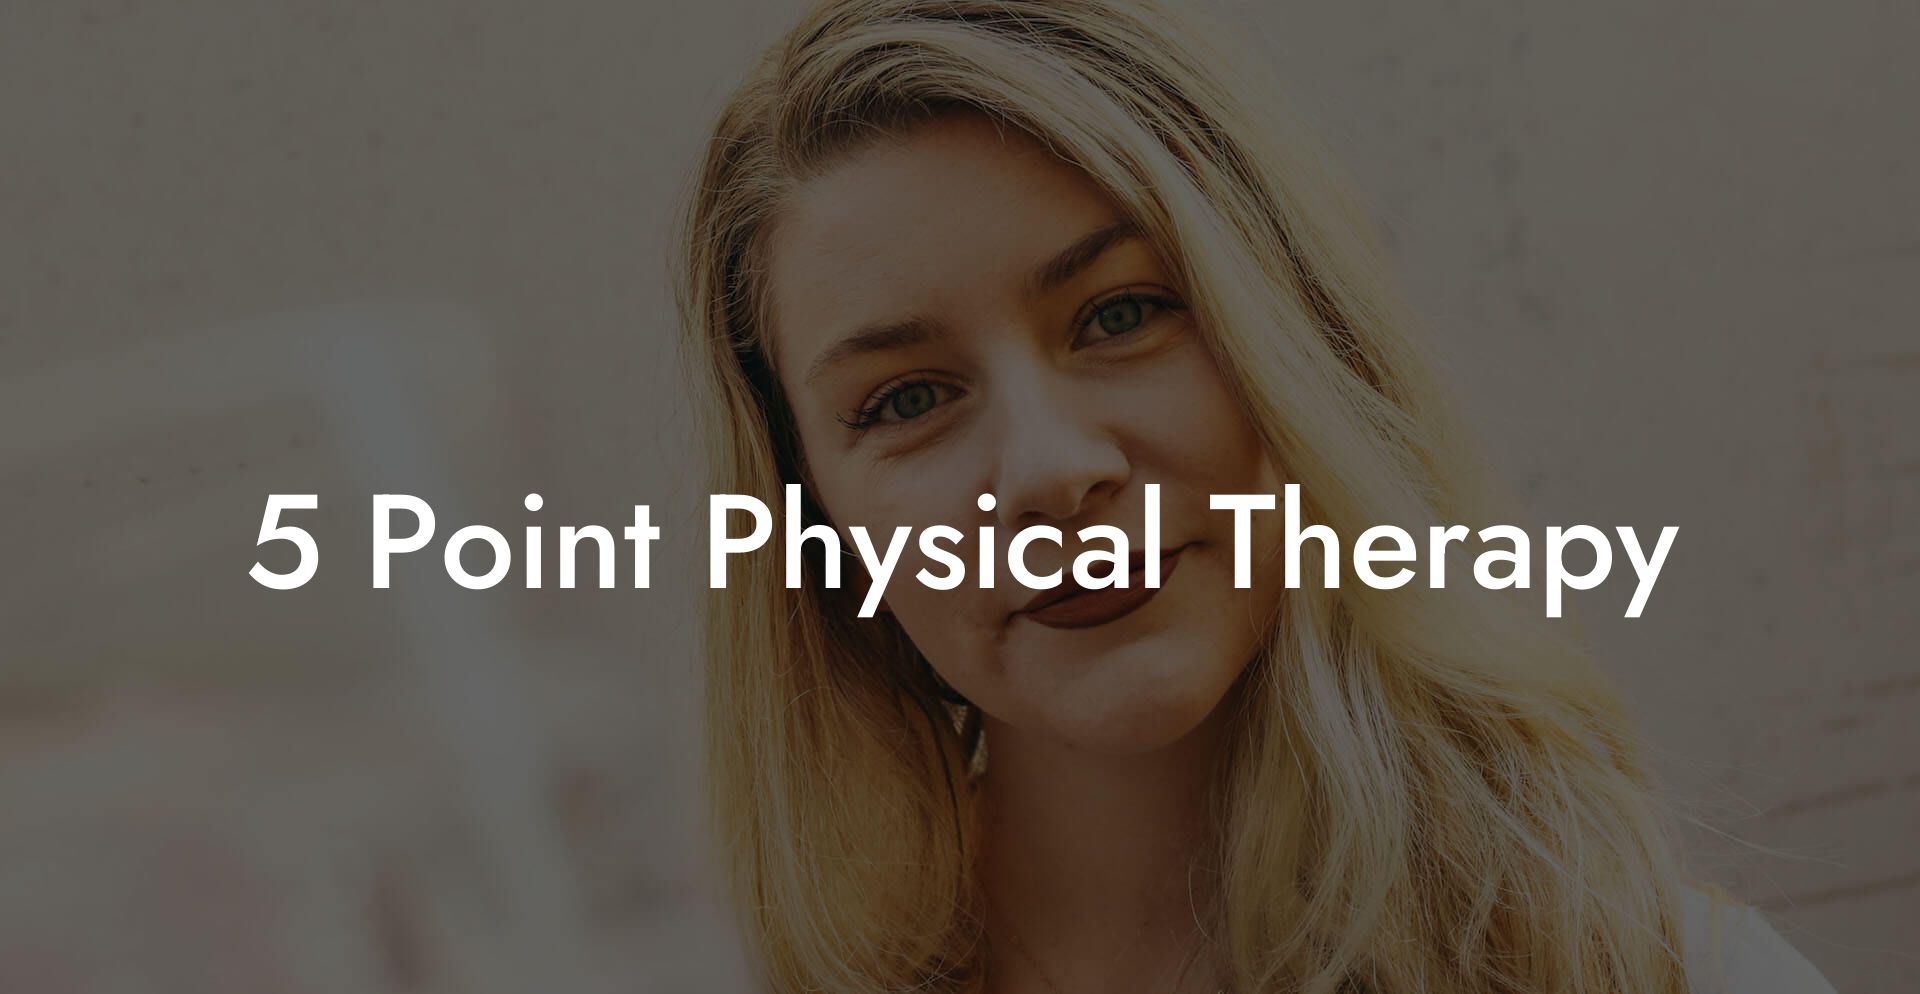 5 Point Physical Therapy